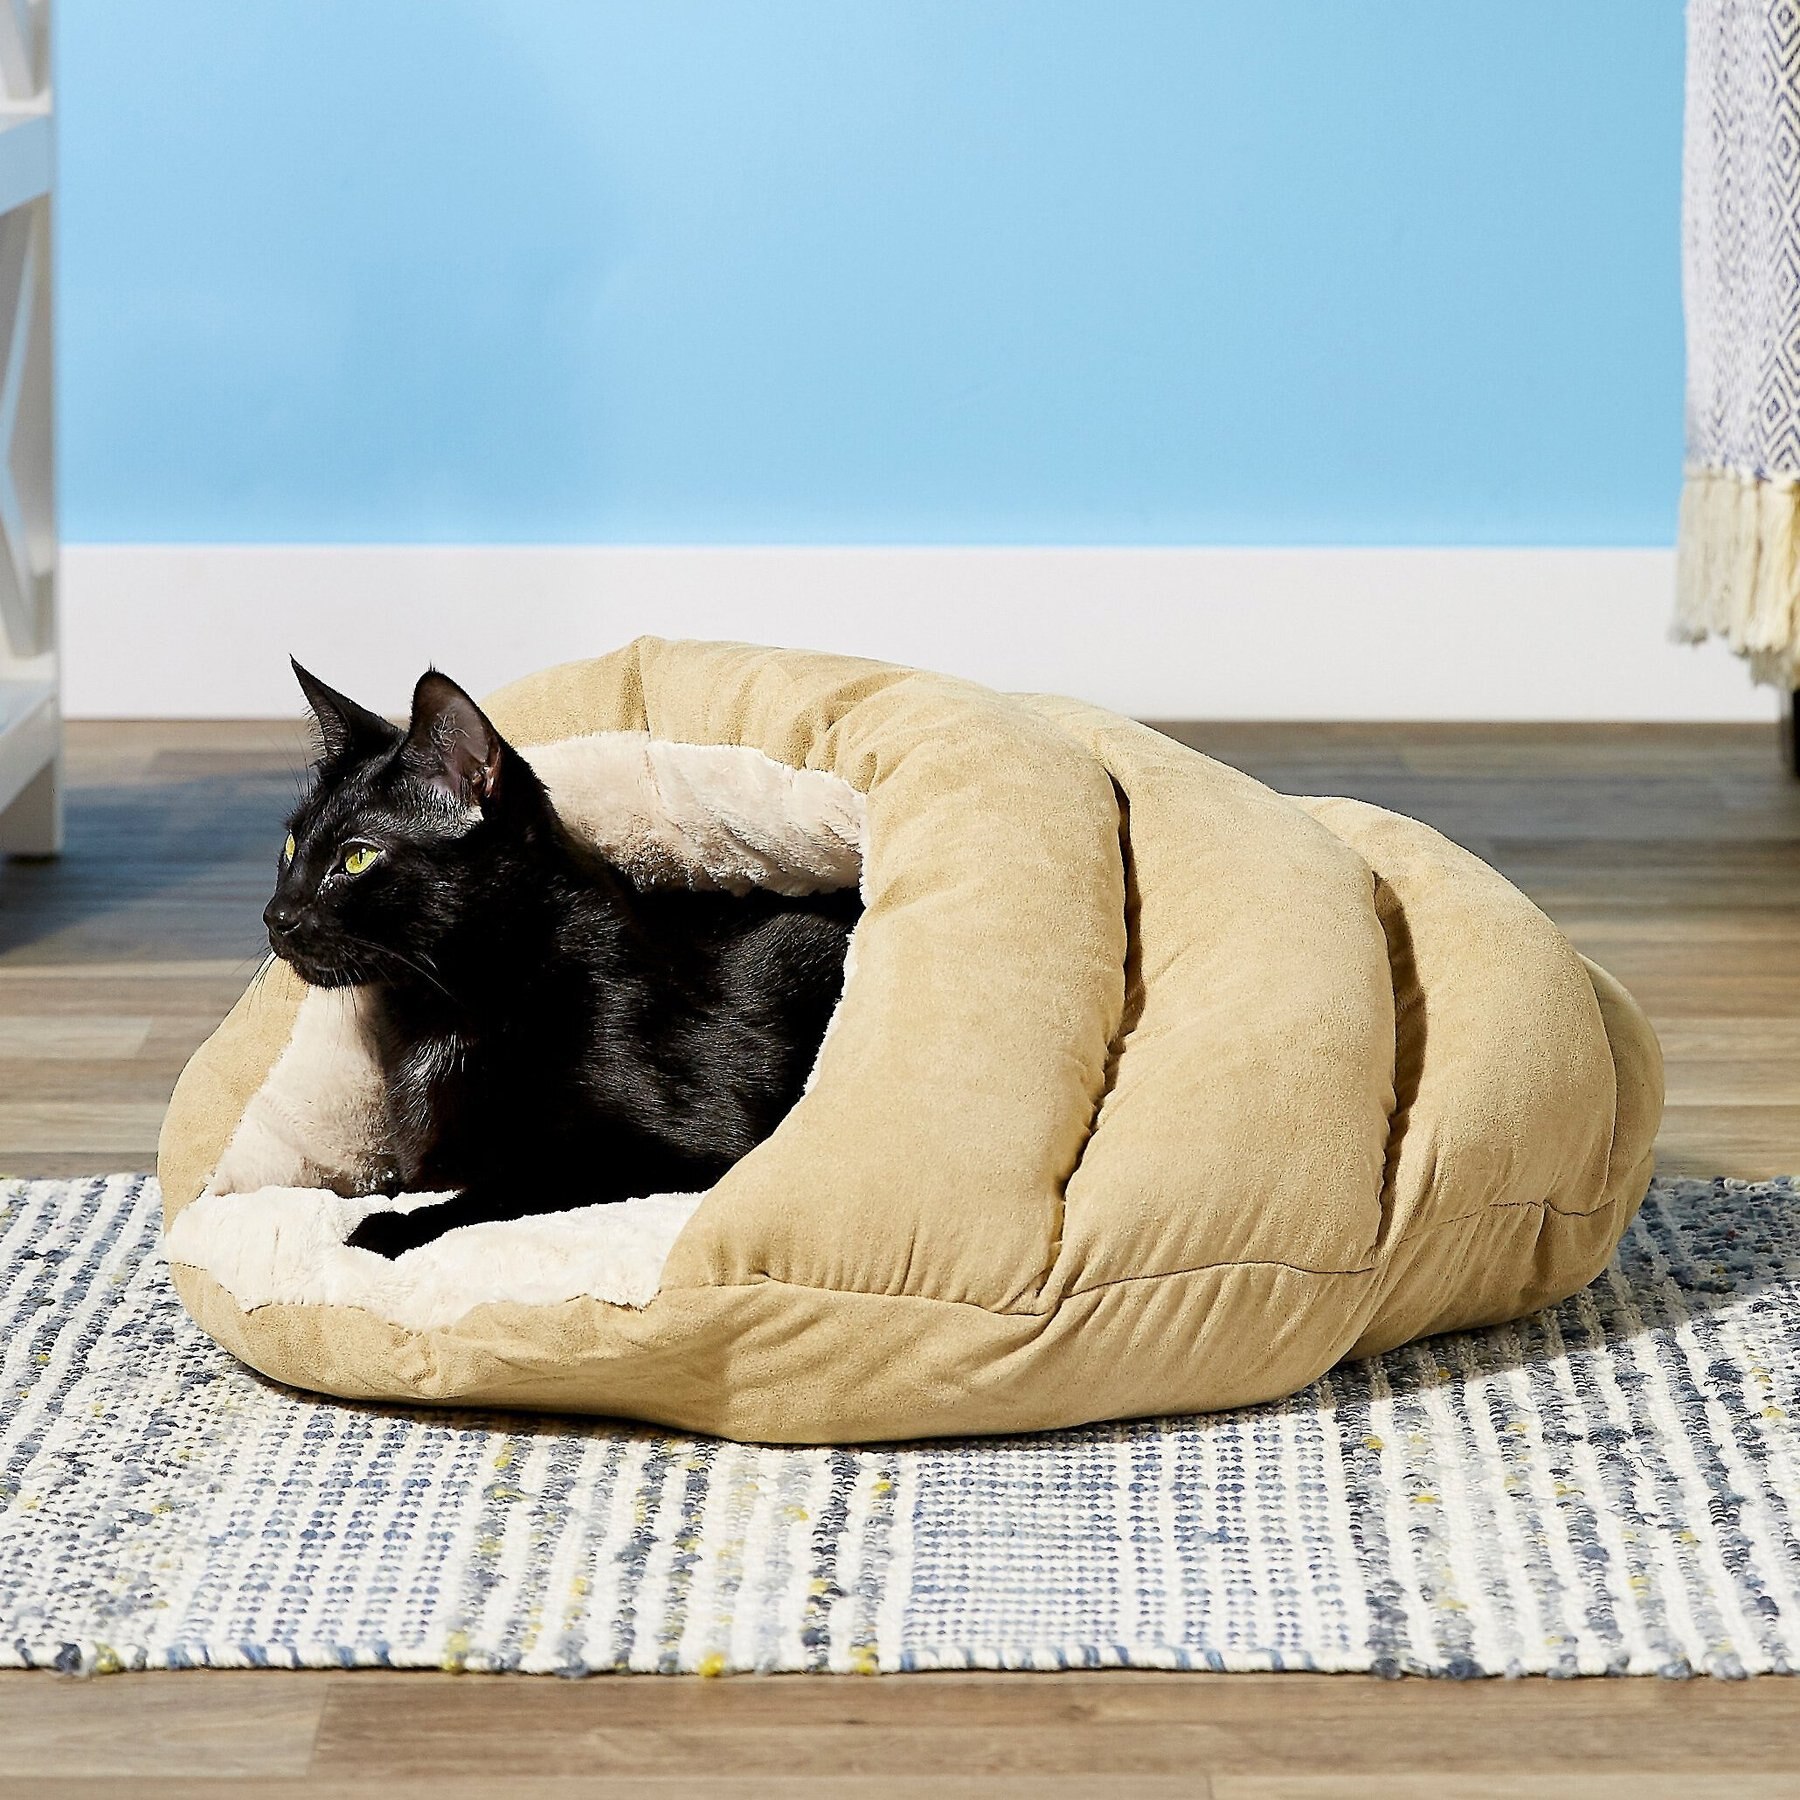 YunNasi Pet Bed Cat & Dog Bed Cave Ultra Soft Bed Pets Comfortable Bed for Cats 38x38x34cm 38x38x34cm, Grey